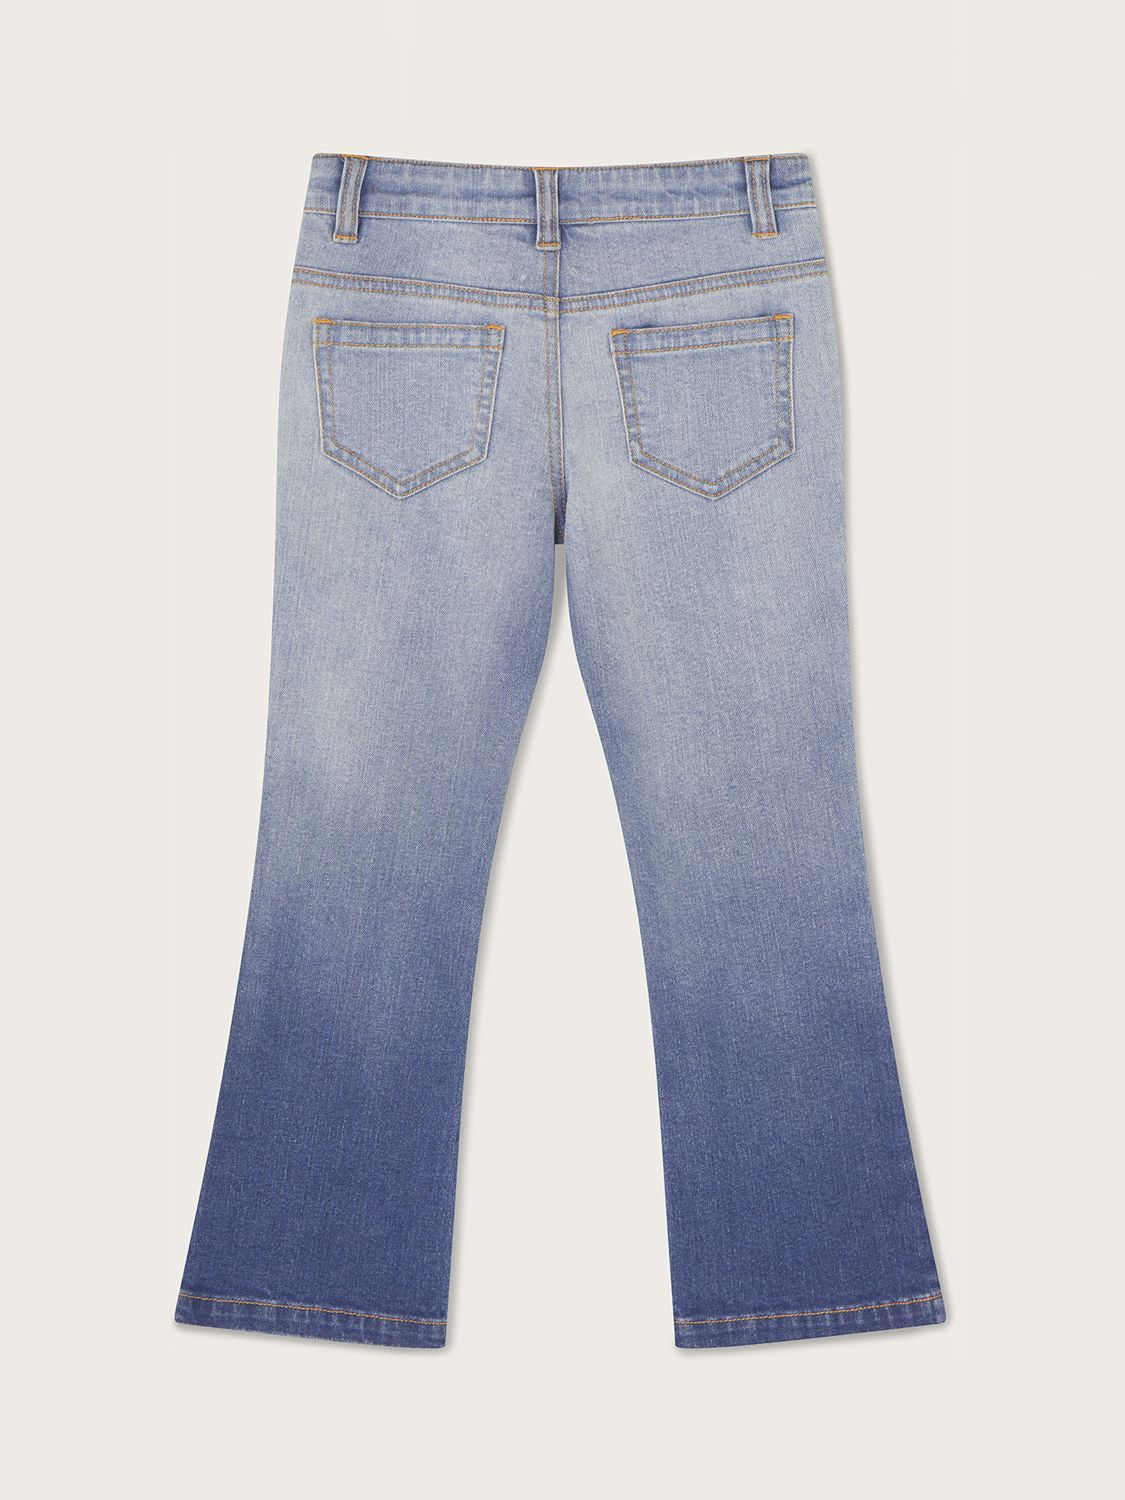 Buy Monsoon Kid's Floral Embroidered Jeans, Blue/Multi Online at johnlewis.com